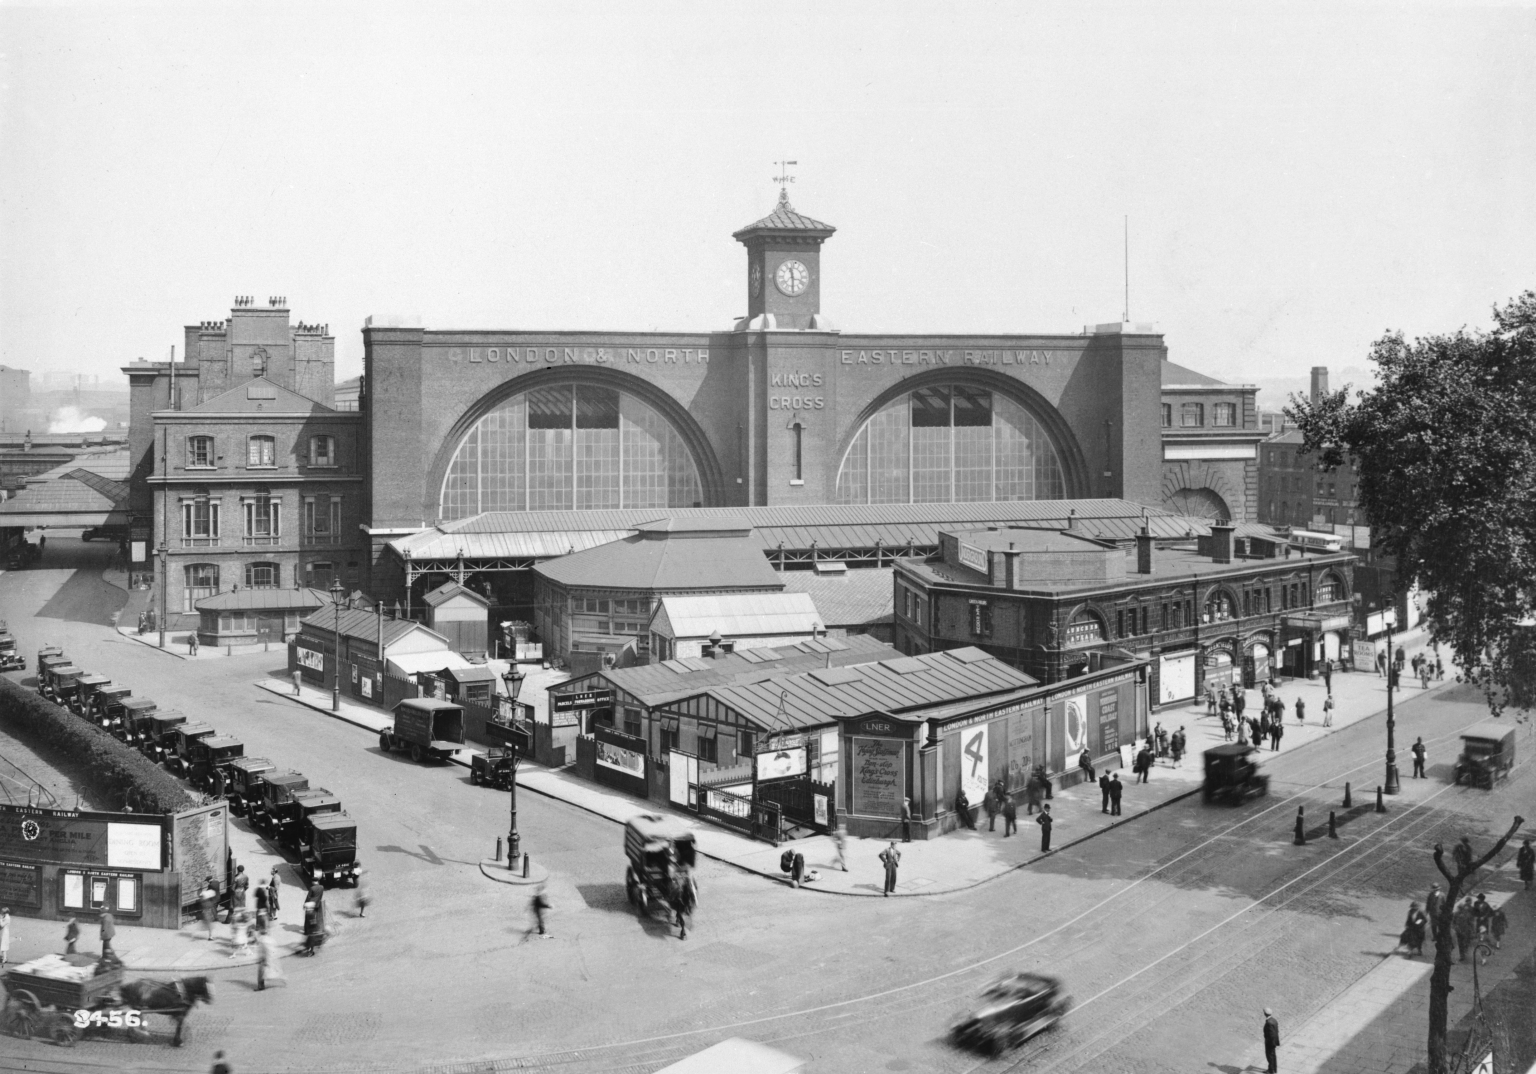 King's Cross Station, about 1927